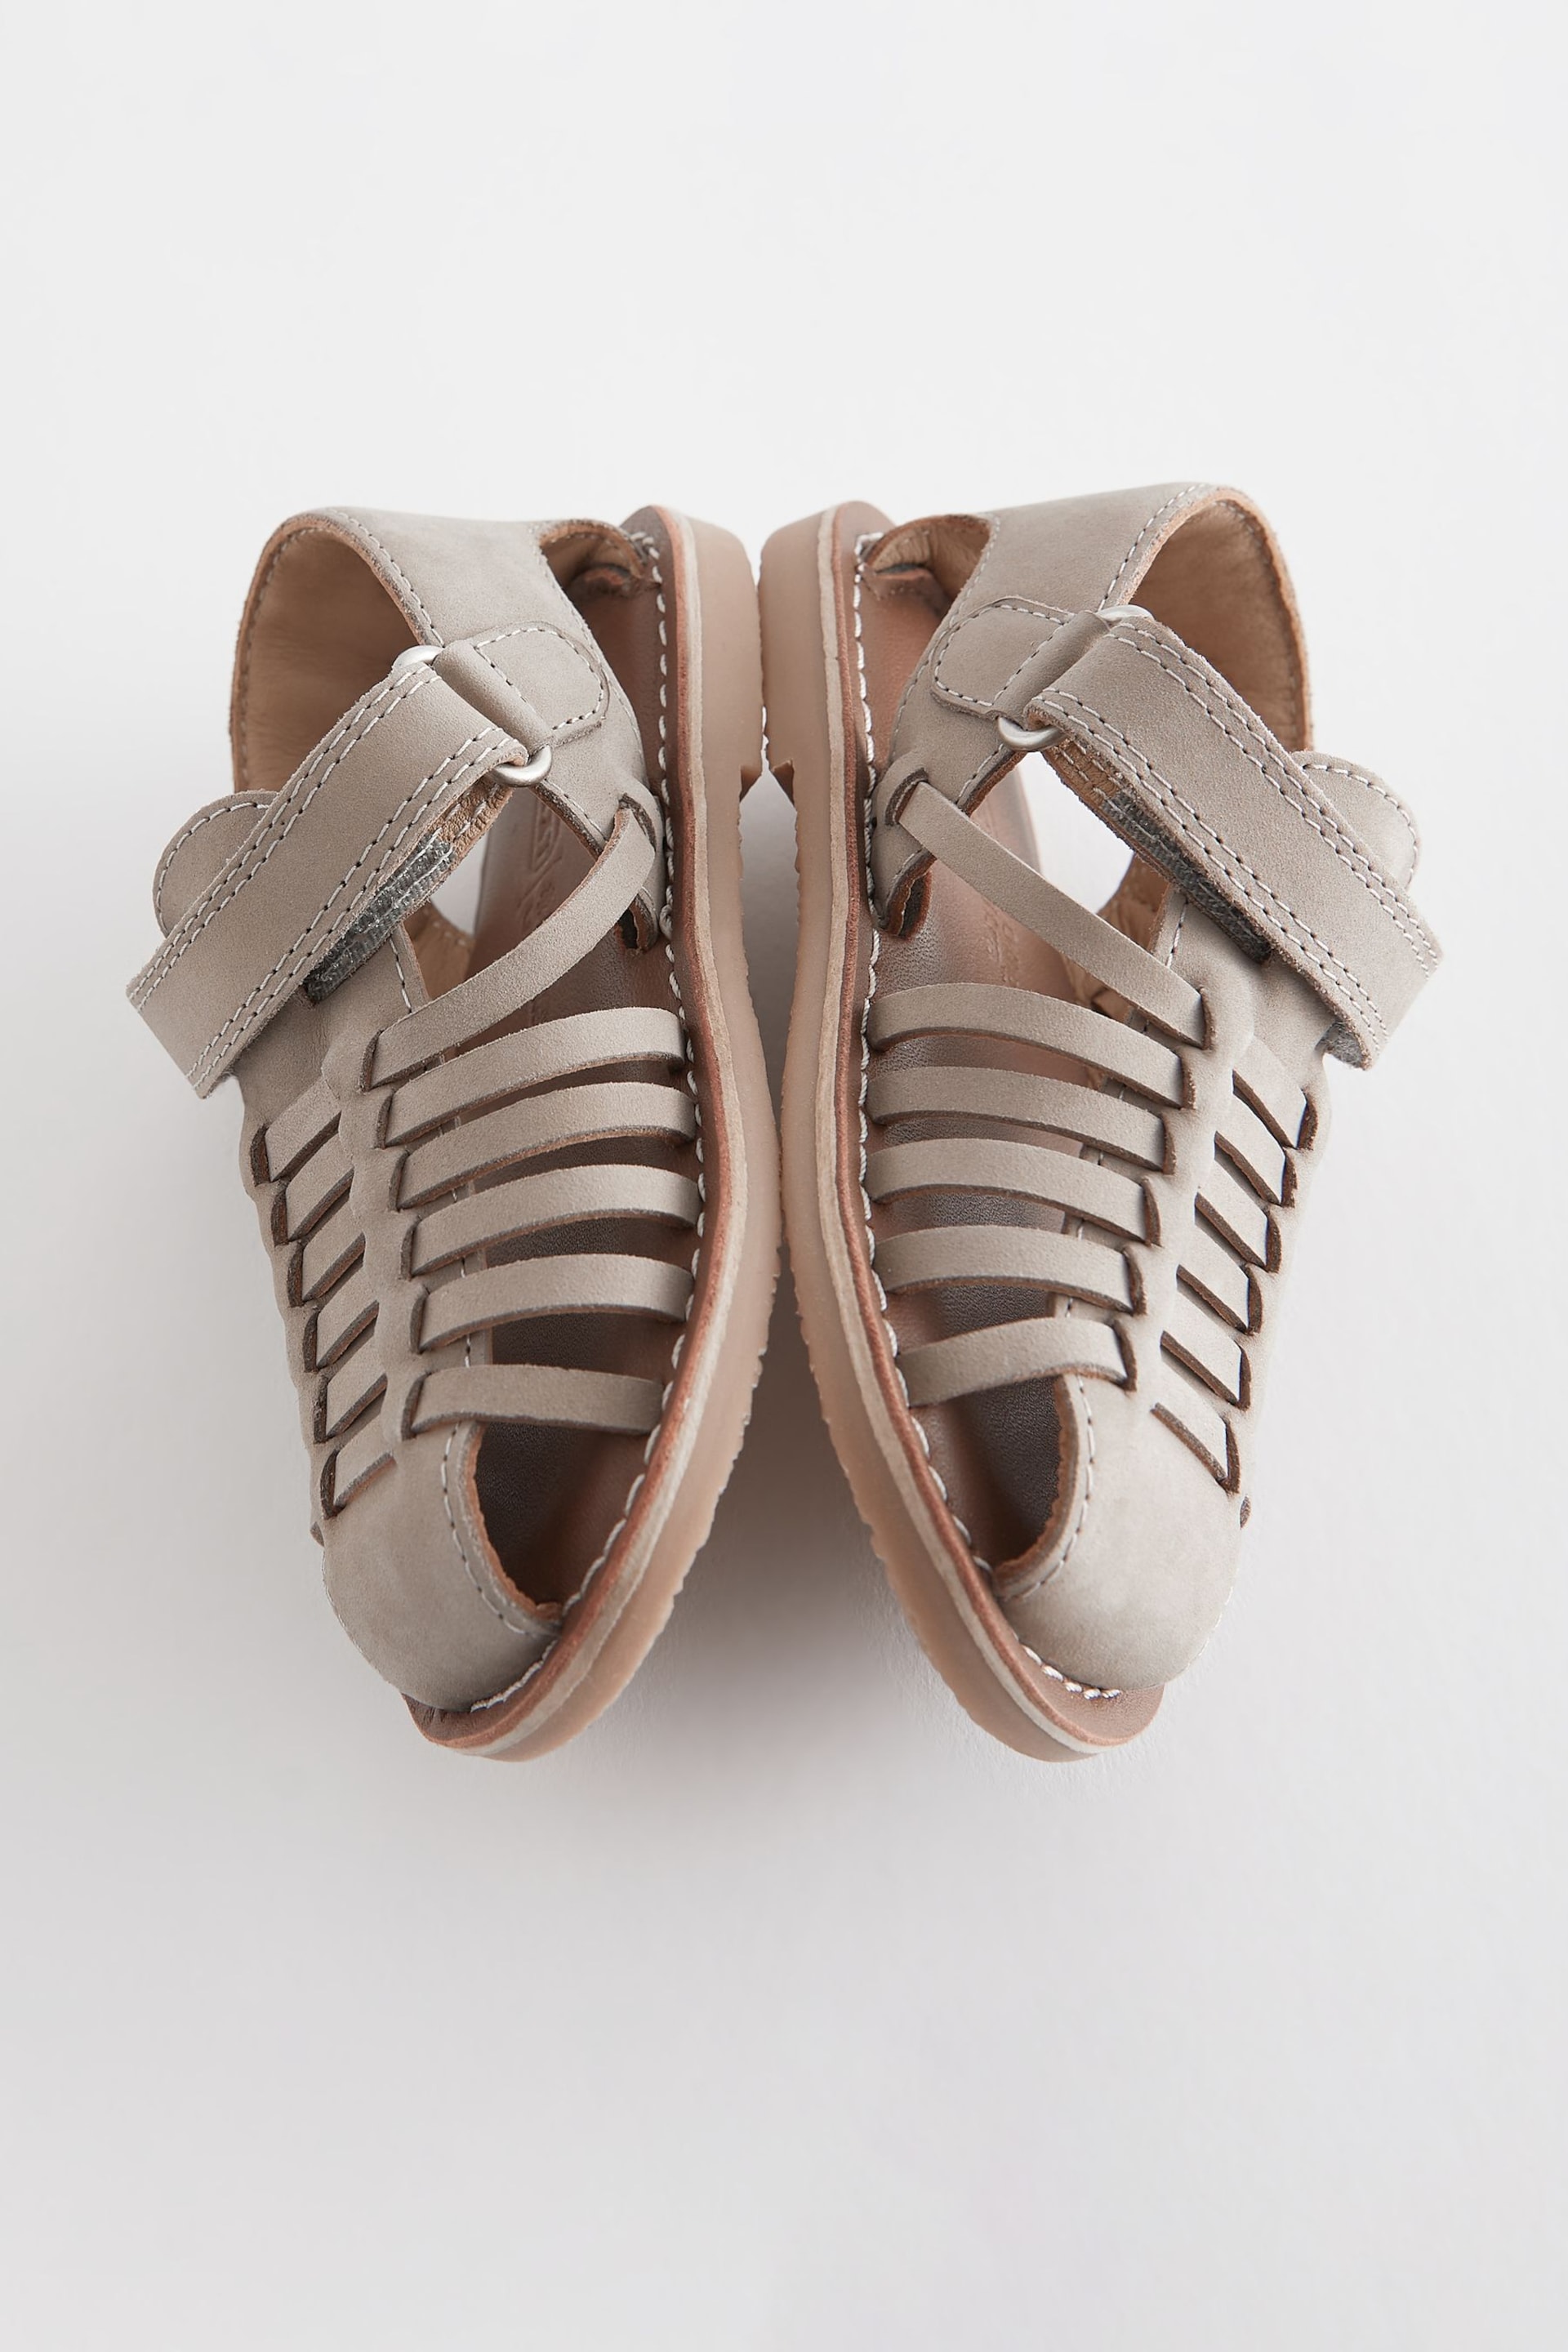 Stone Neutral Leather Closed Toe Sandals - Image 3 of 5